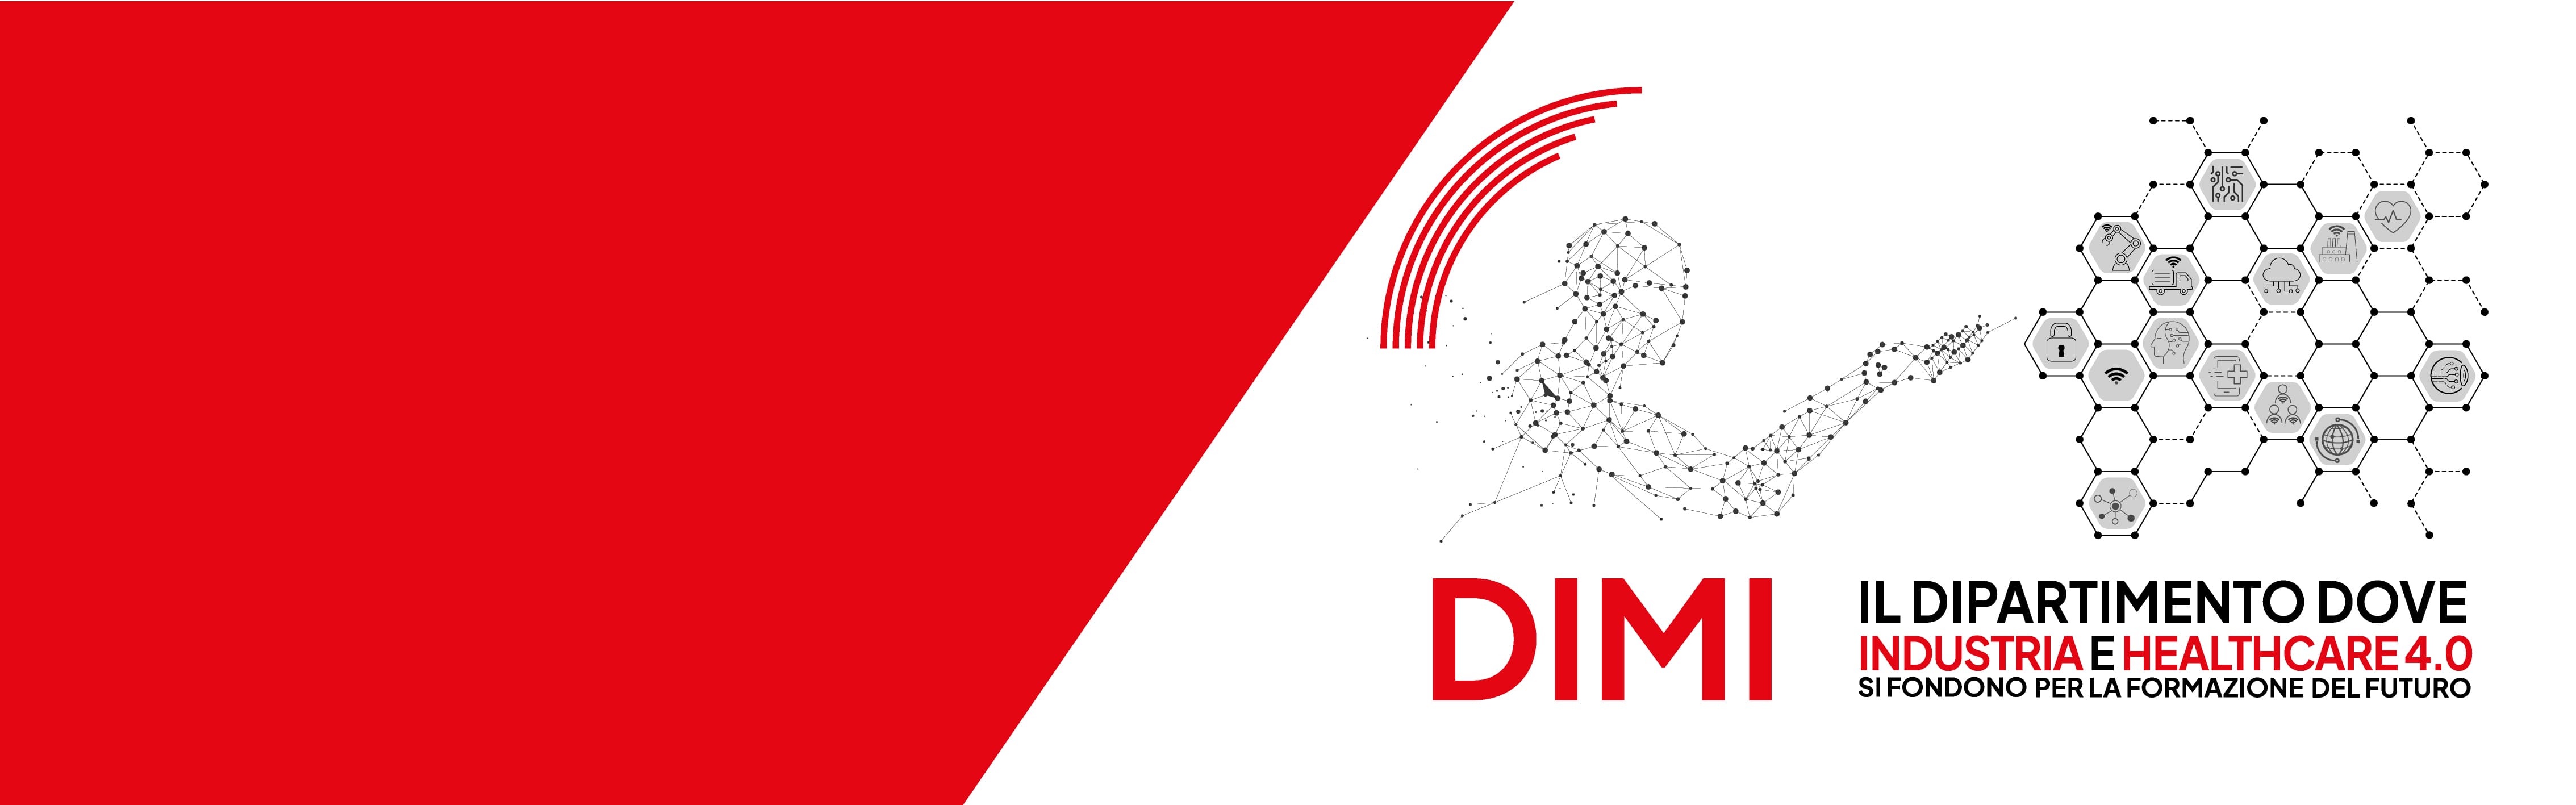 DIMI: where industry and healthcare 4.0 come together for the future of education.